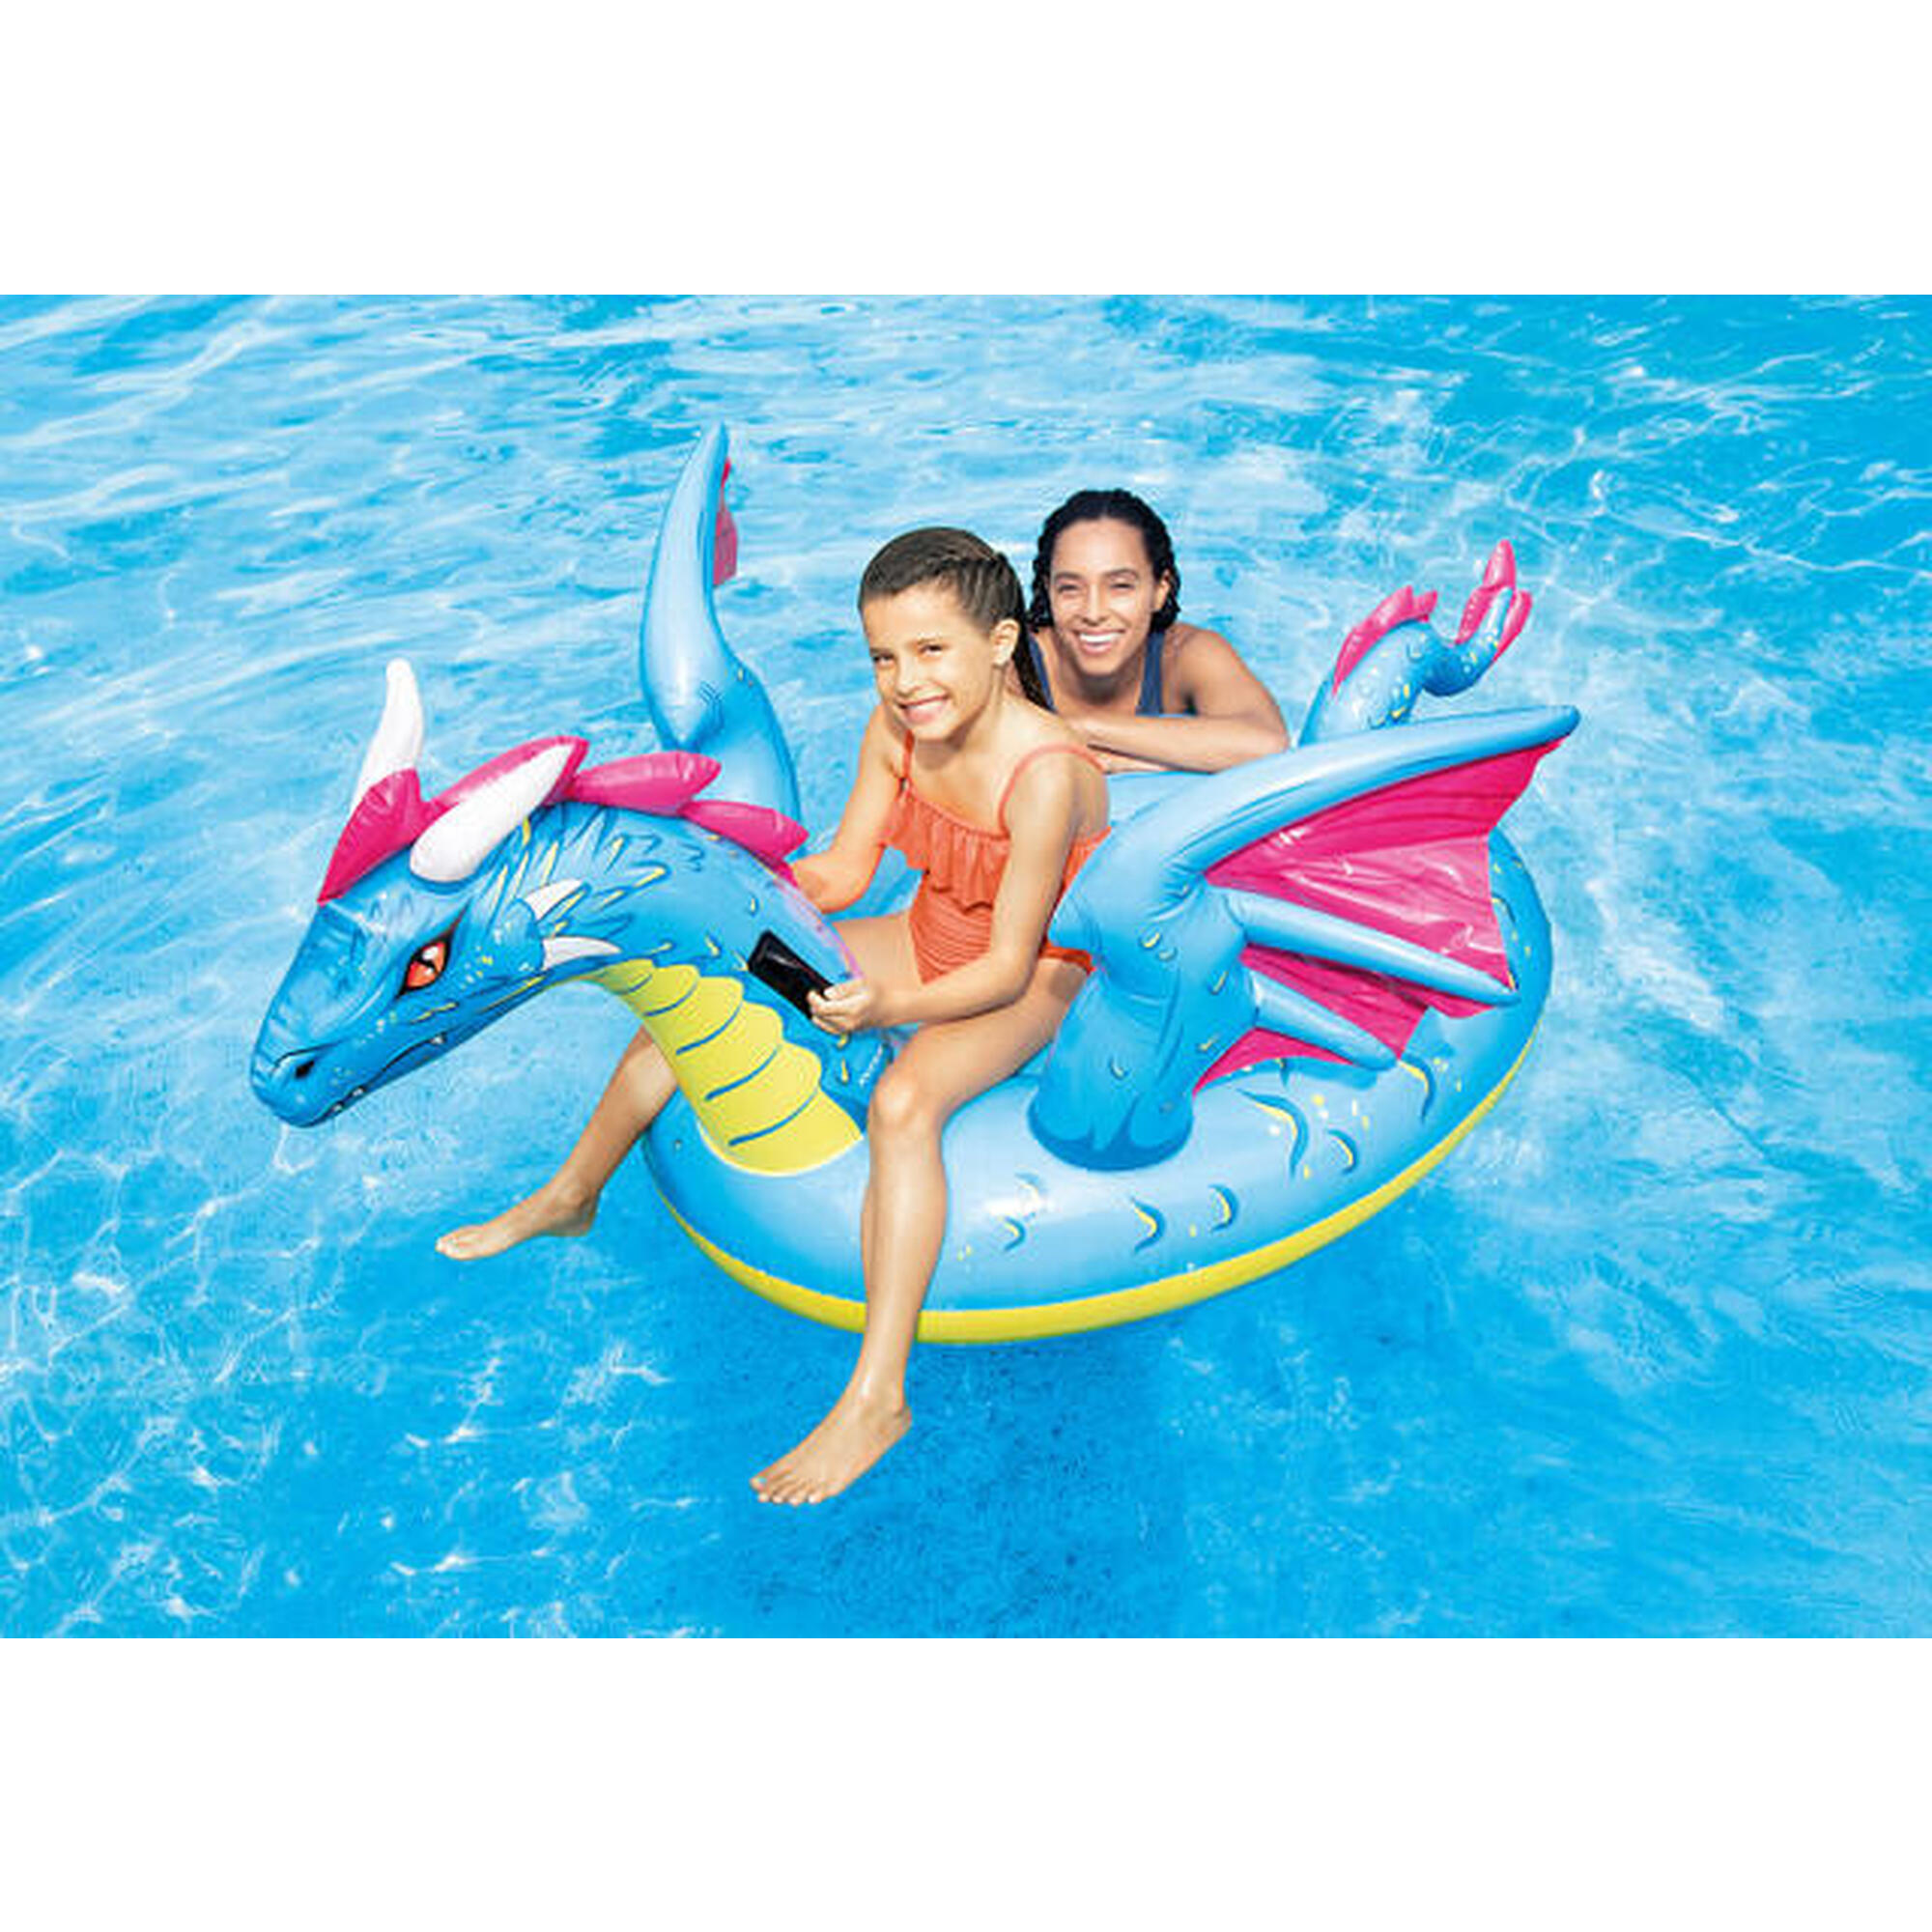 Dragon Ride-On Inflatable Pool Float - Blue